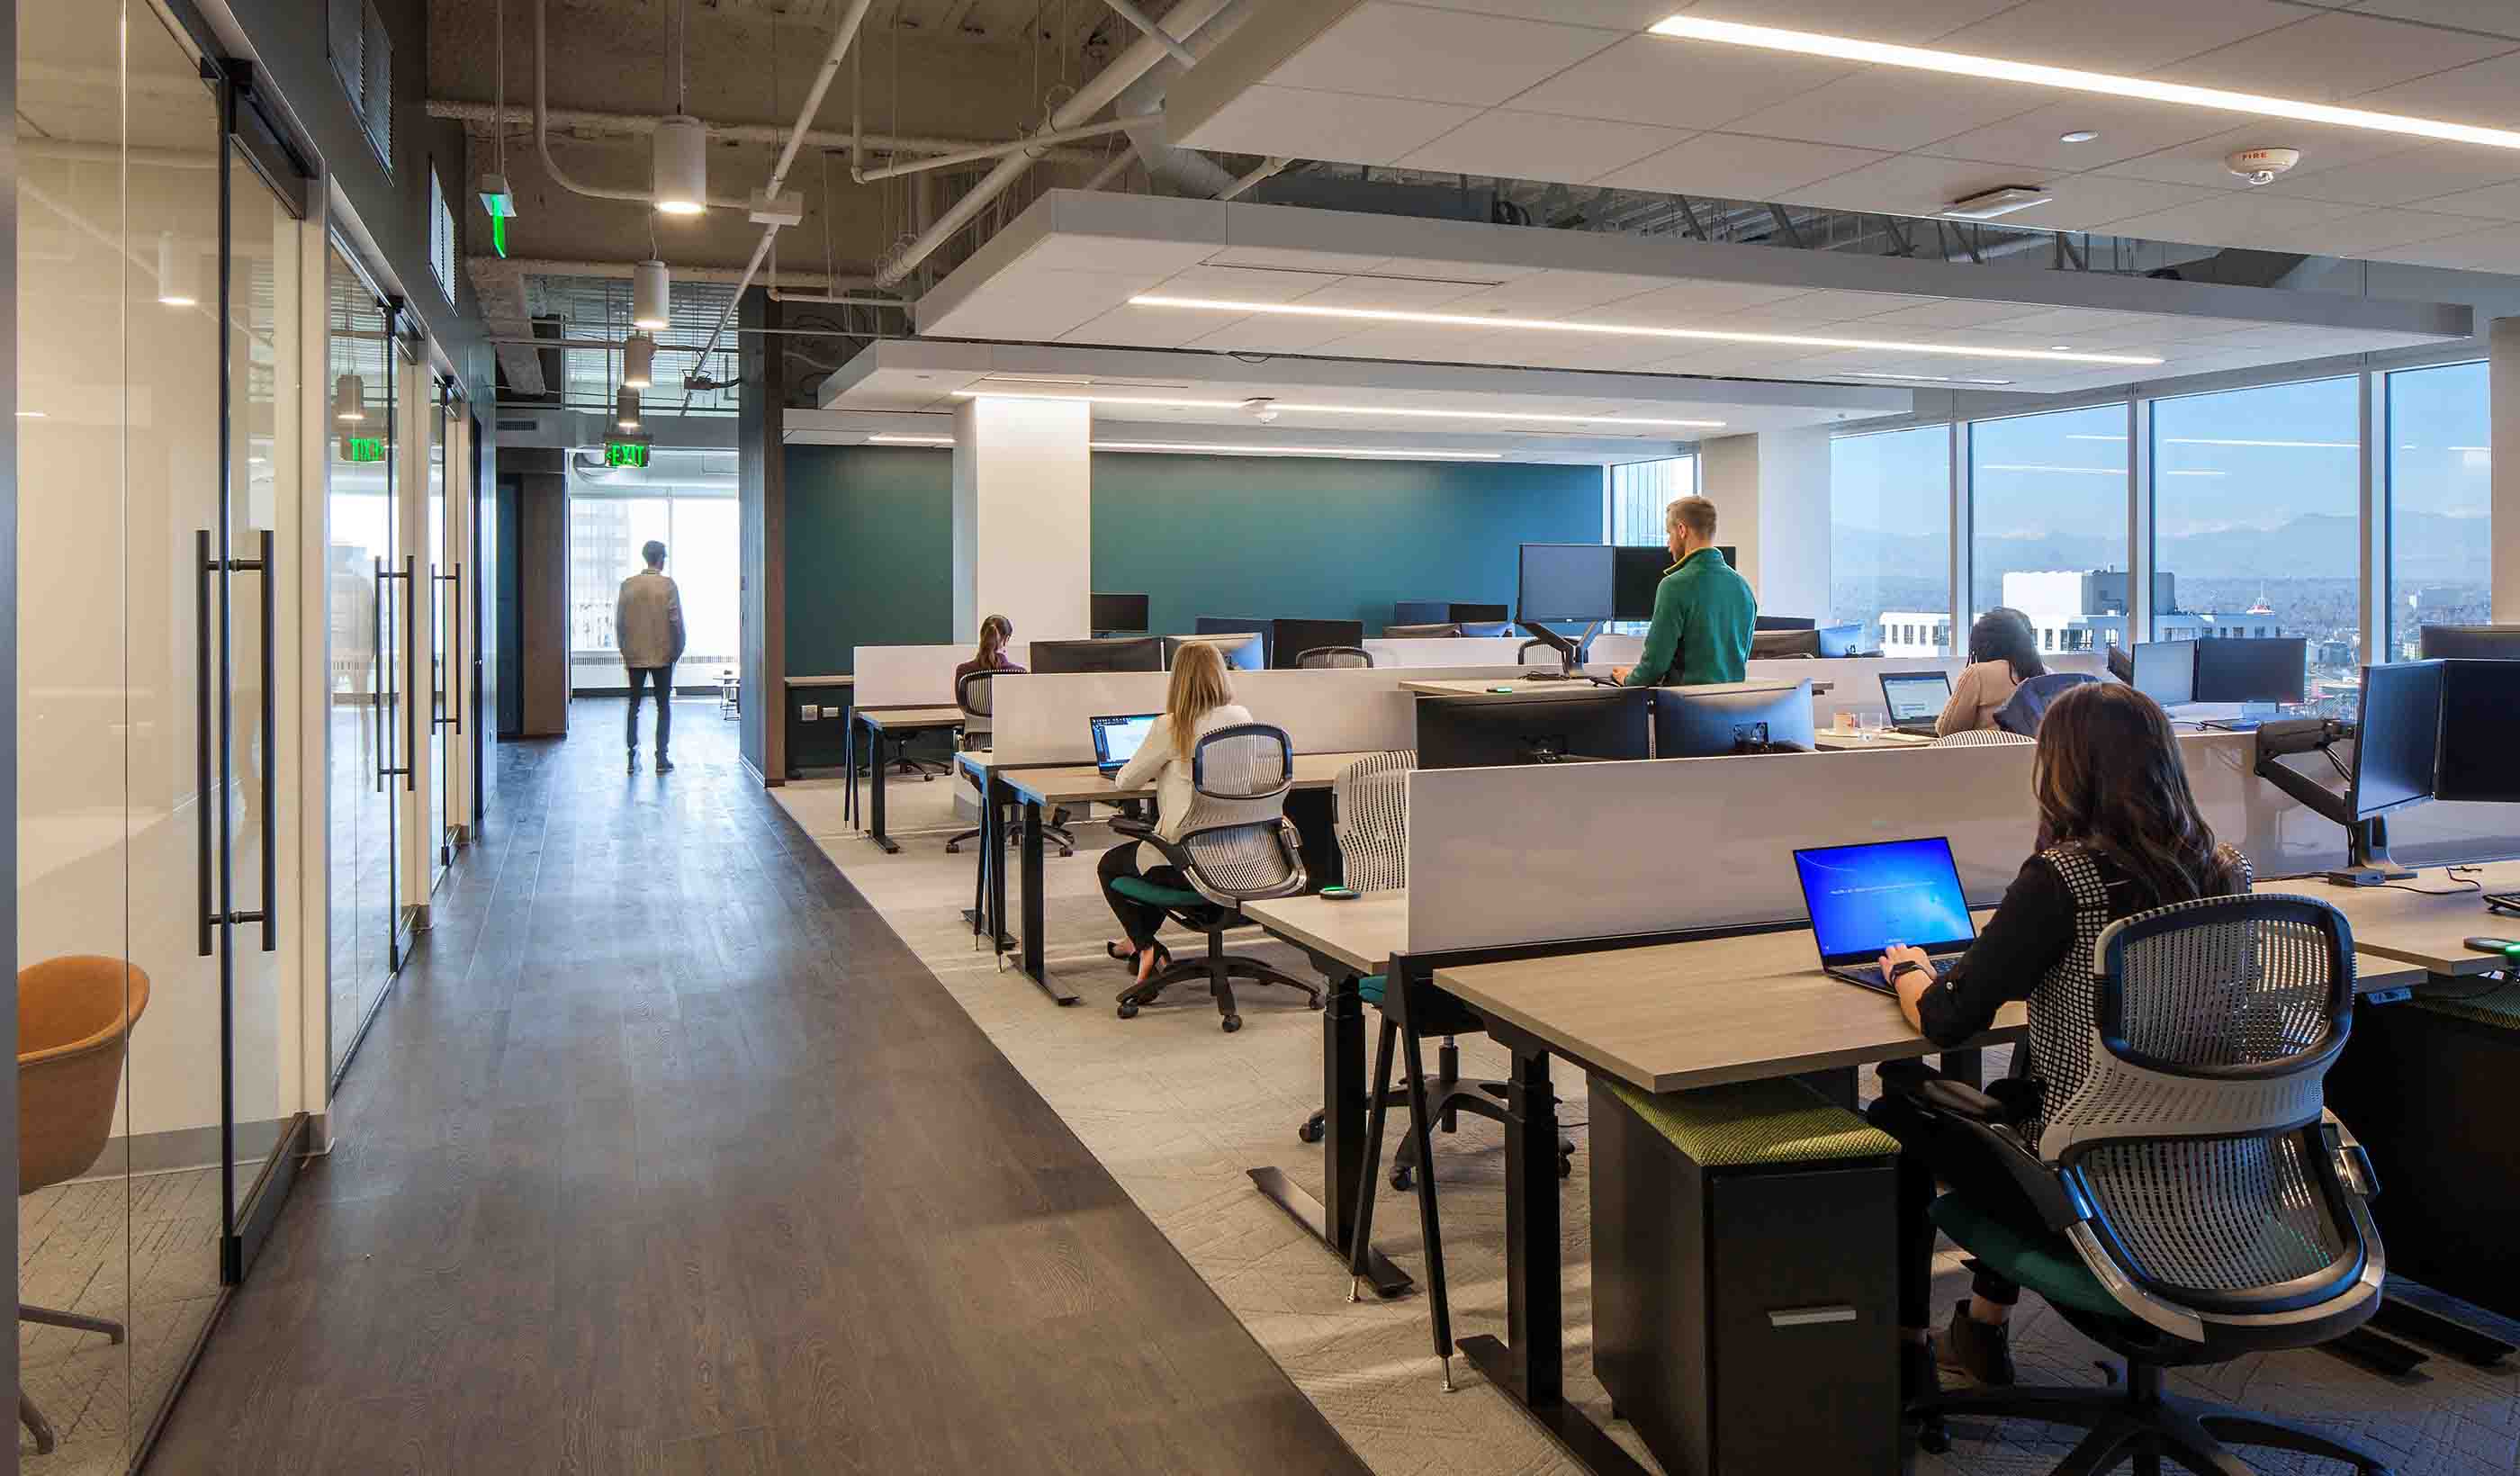 PODCAST: Stantec’s Workplace team discusses the return to the office